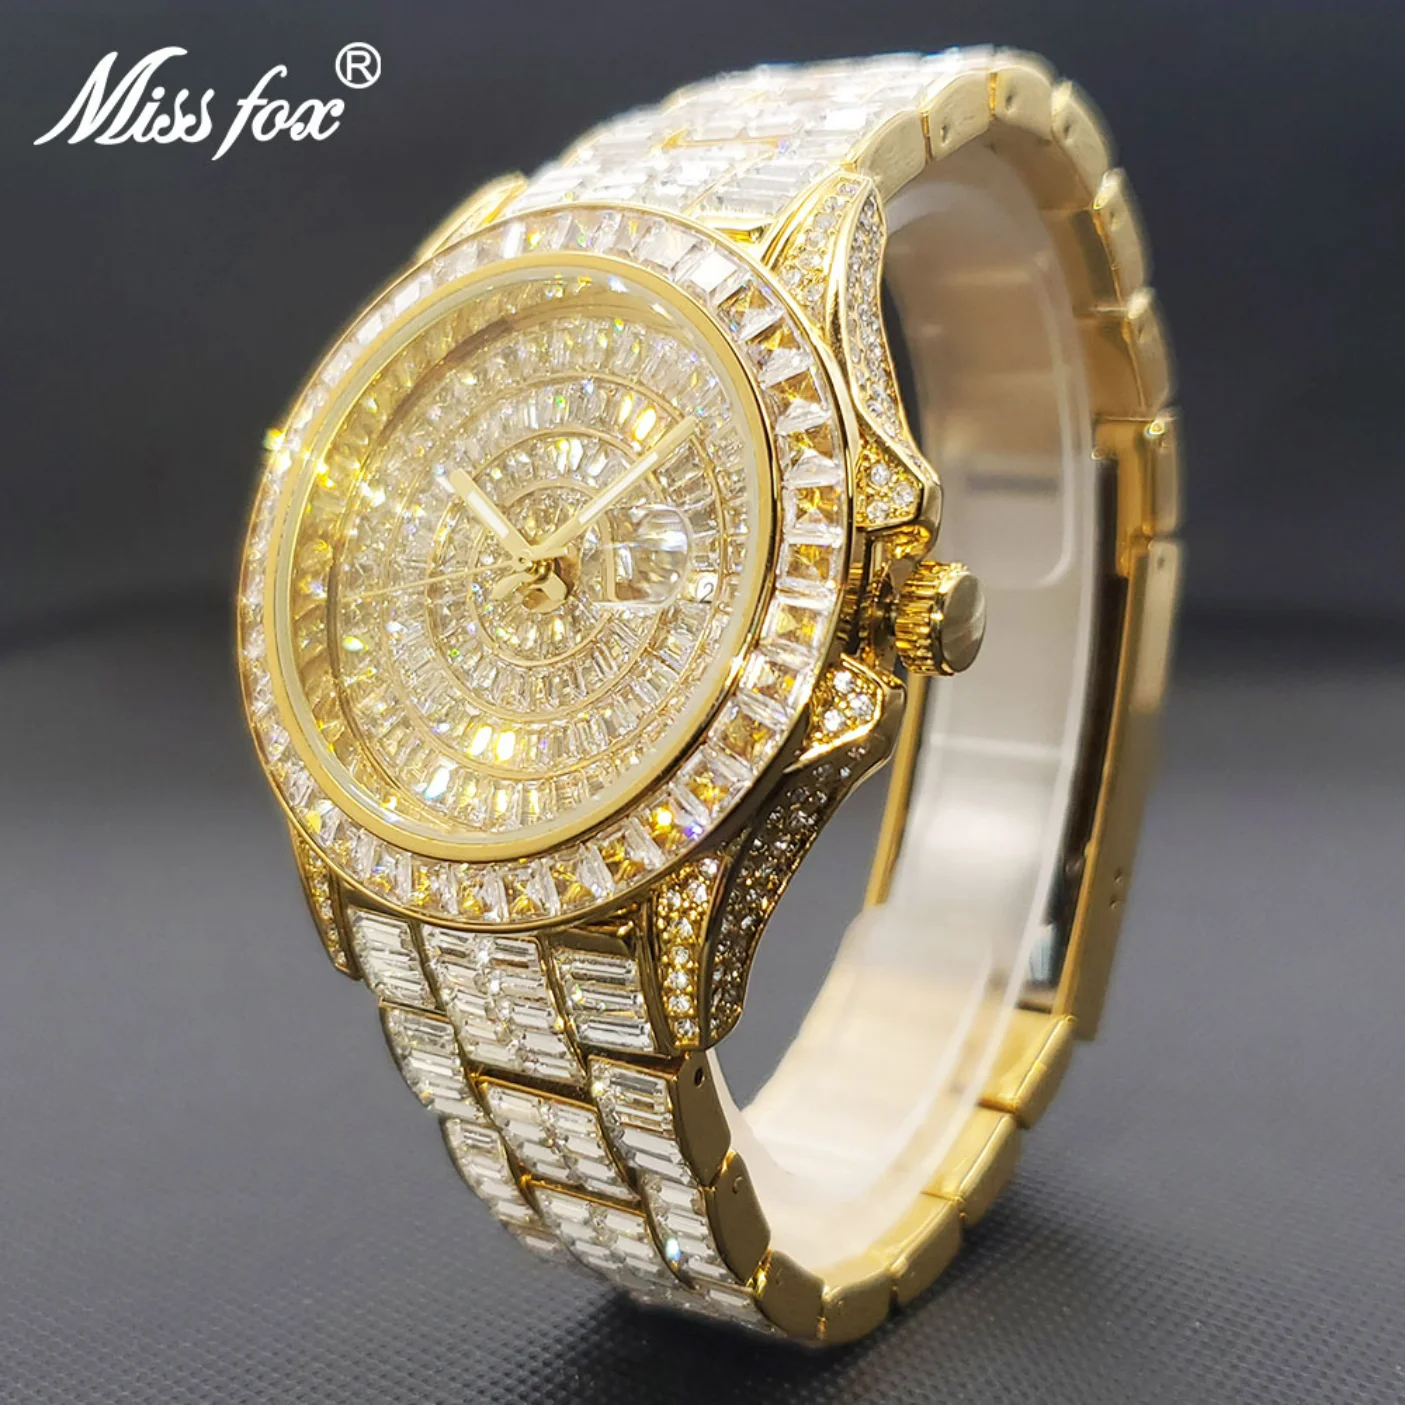 

Replica Watches Men Moissanite Gold Watch Brand Luxury Day Date AAA Diamond Watches Unique Hip Hop Iced Out Jewelry Watch Mens